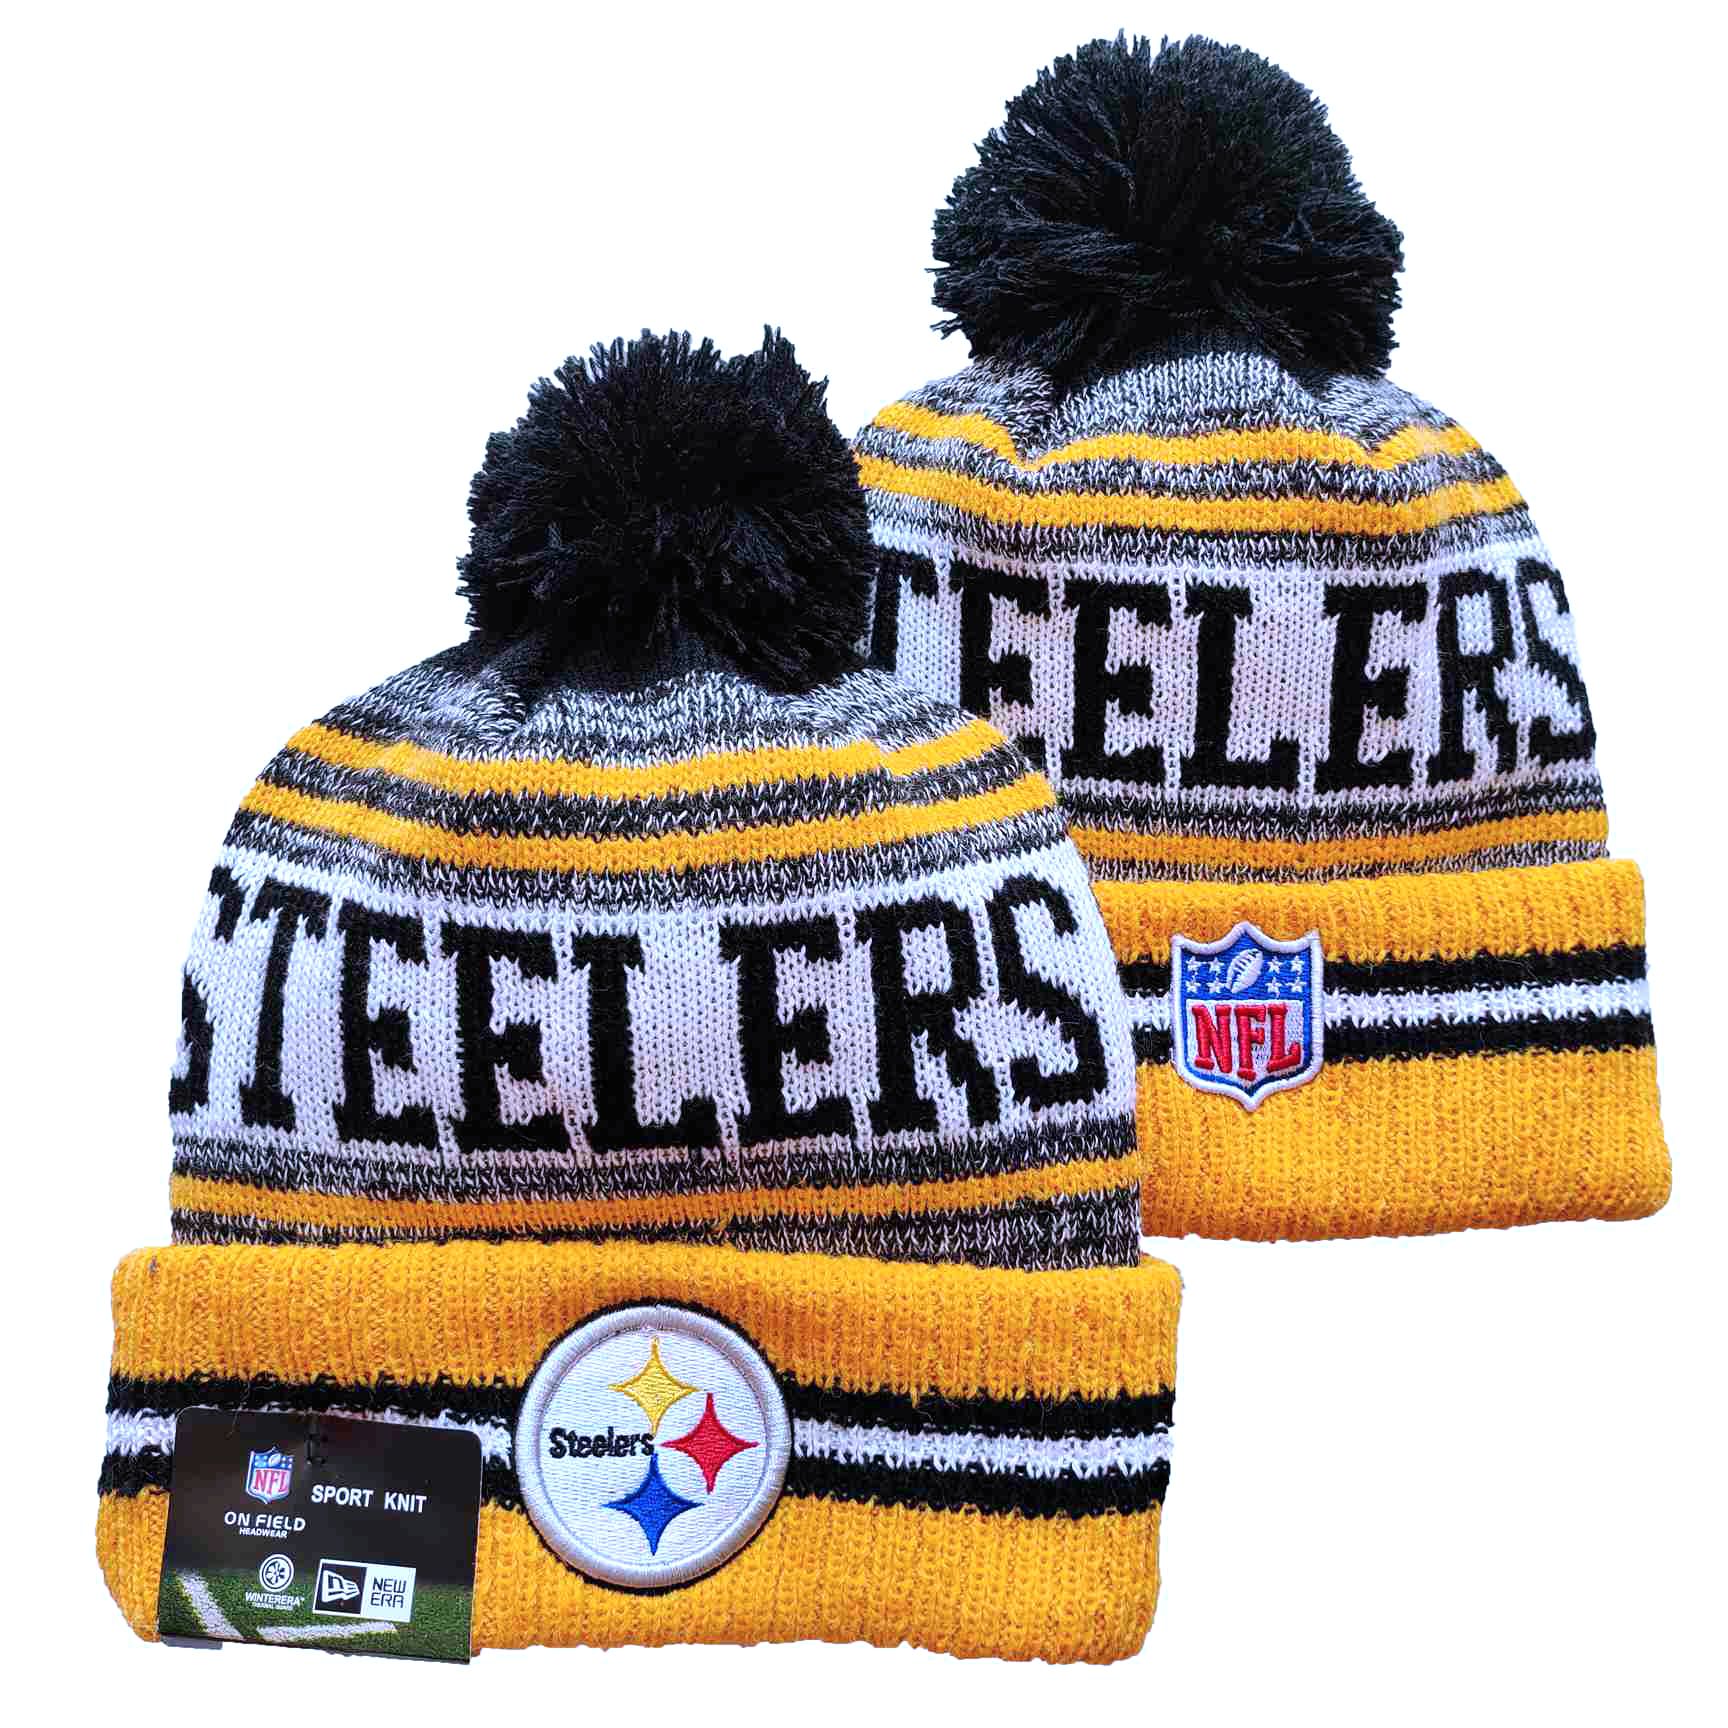 NFL Pittsburgh Steelers Beanies Knit Hats-YD1159